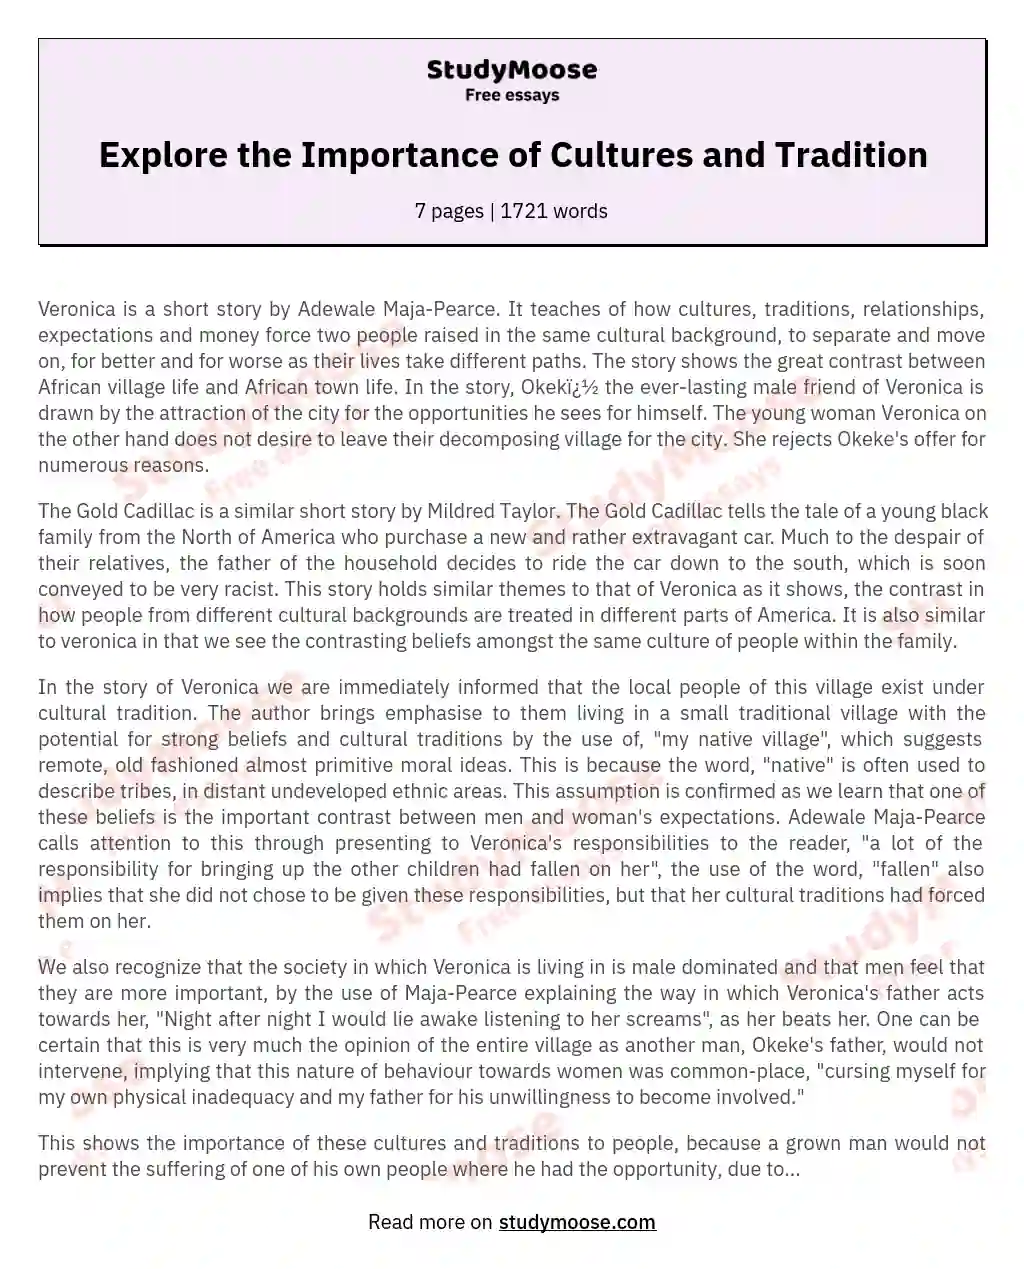 importance of culture and tradition essay